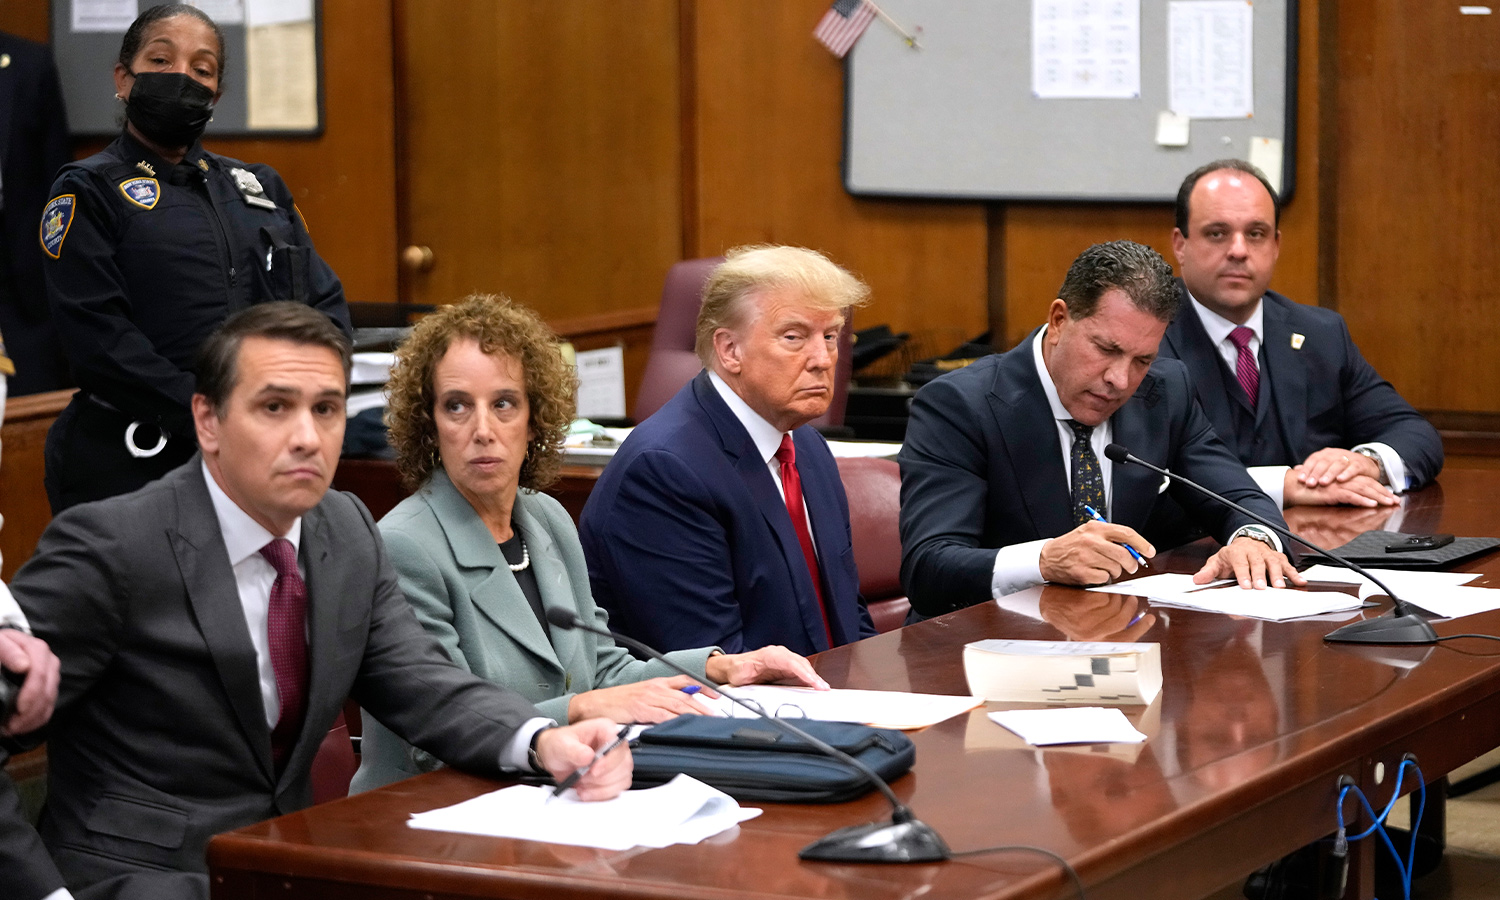 Donald Trump in a Manhattan courtroom where he had his charges read out to him. He has been charged with 34 counts of falsifying business records.